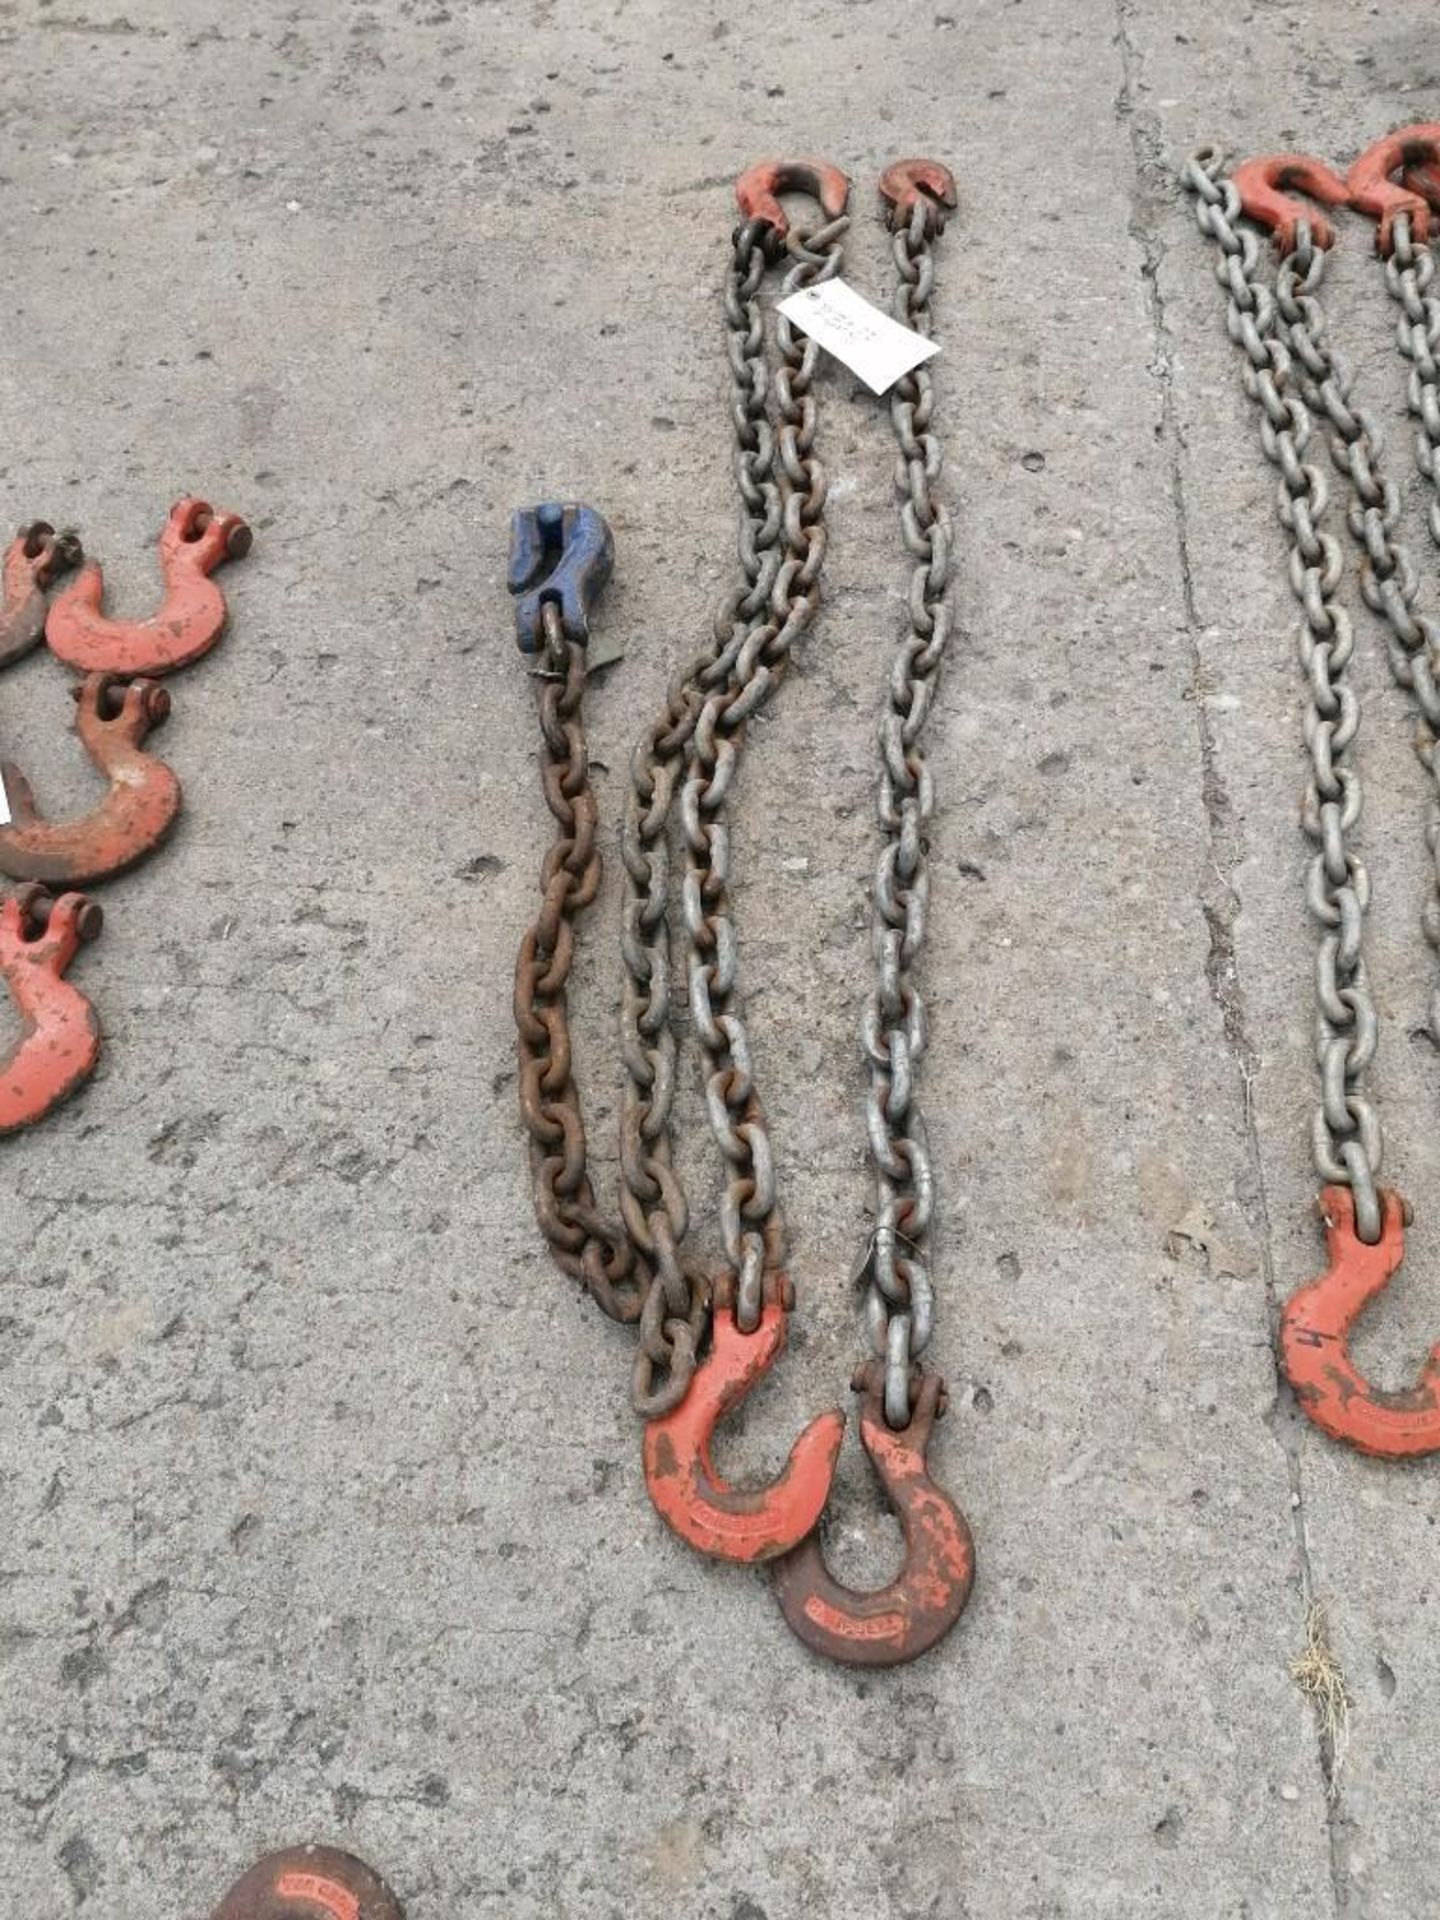 (3) 1/2" USA 4' & (1) 1/2" USA 2' Chain with Hook. Located at 301 E Henry Street, Mt. Pleasant, IA